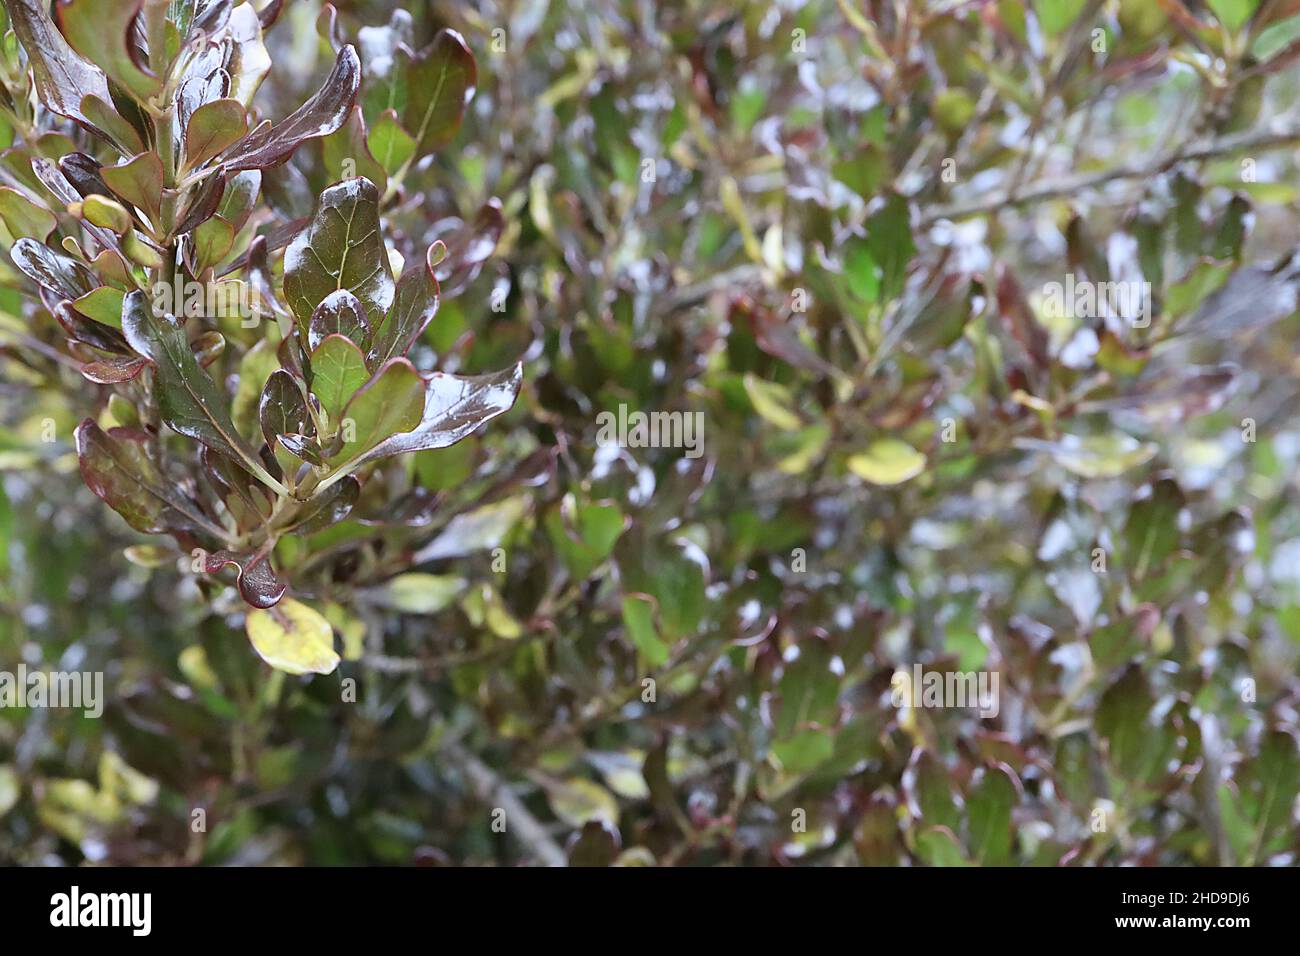 Coprosma repens ‘Pacific Night’ Looking glass plant Pacific Night – glossy dark green ovate leaves with purple margins and matt underside, Stock Photo